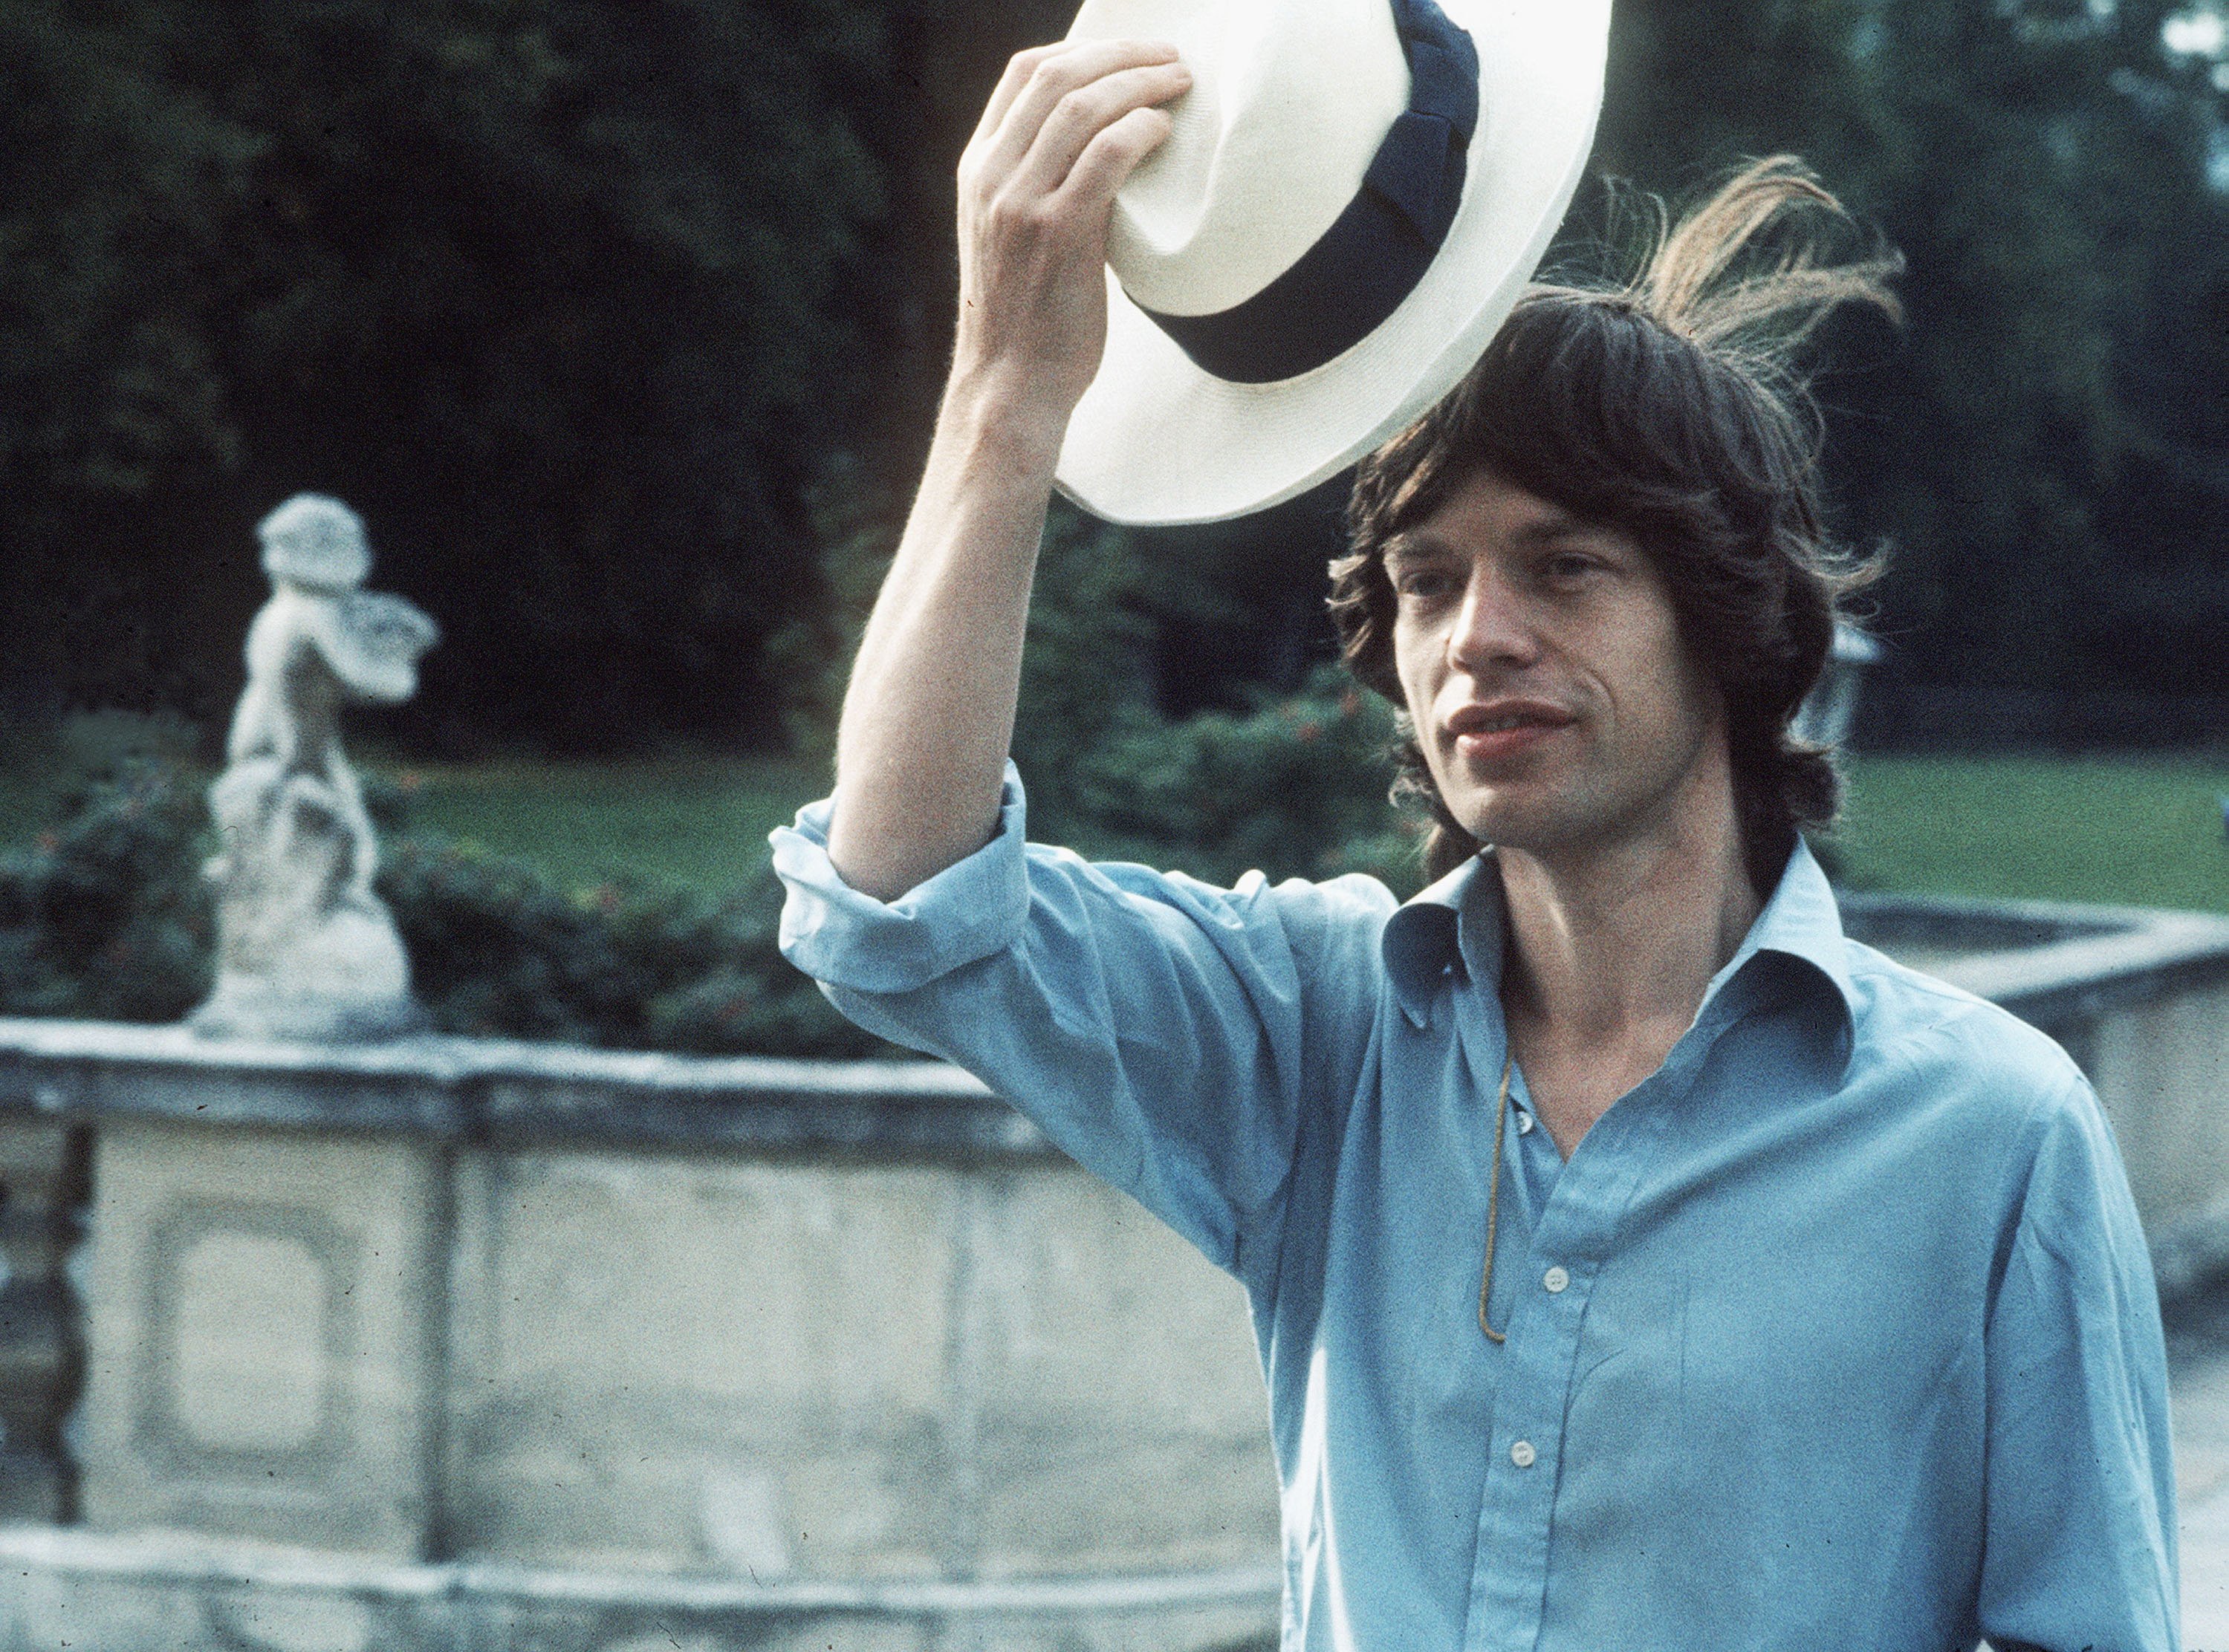 The Rolling Stones' Mick Jagger holding a hat